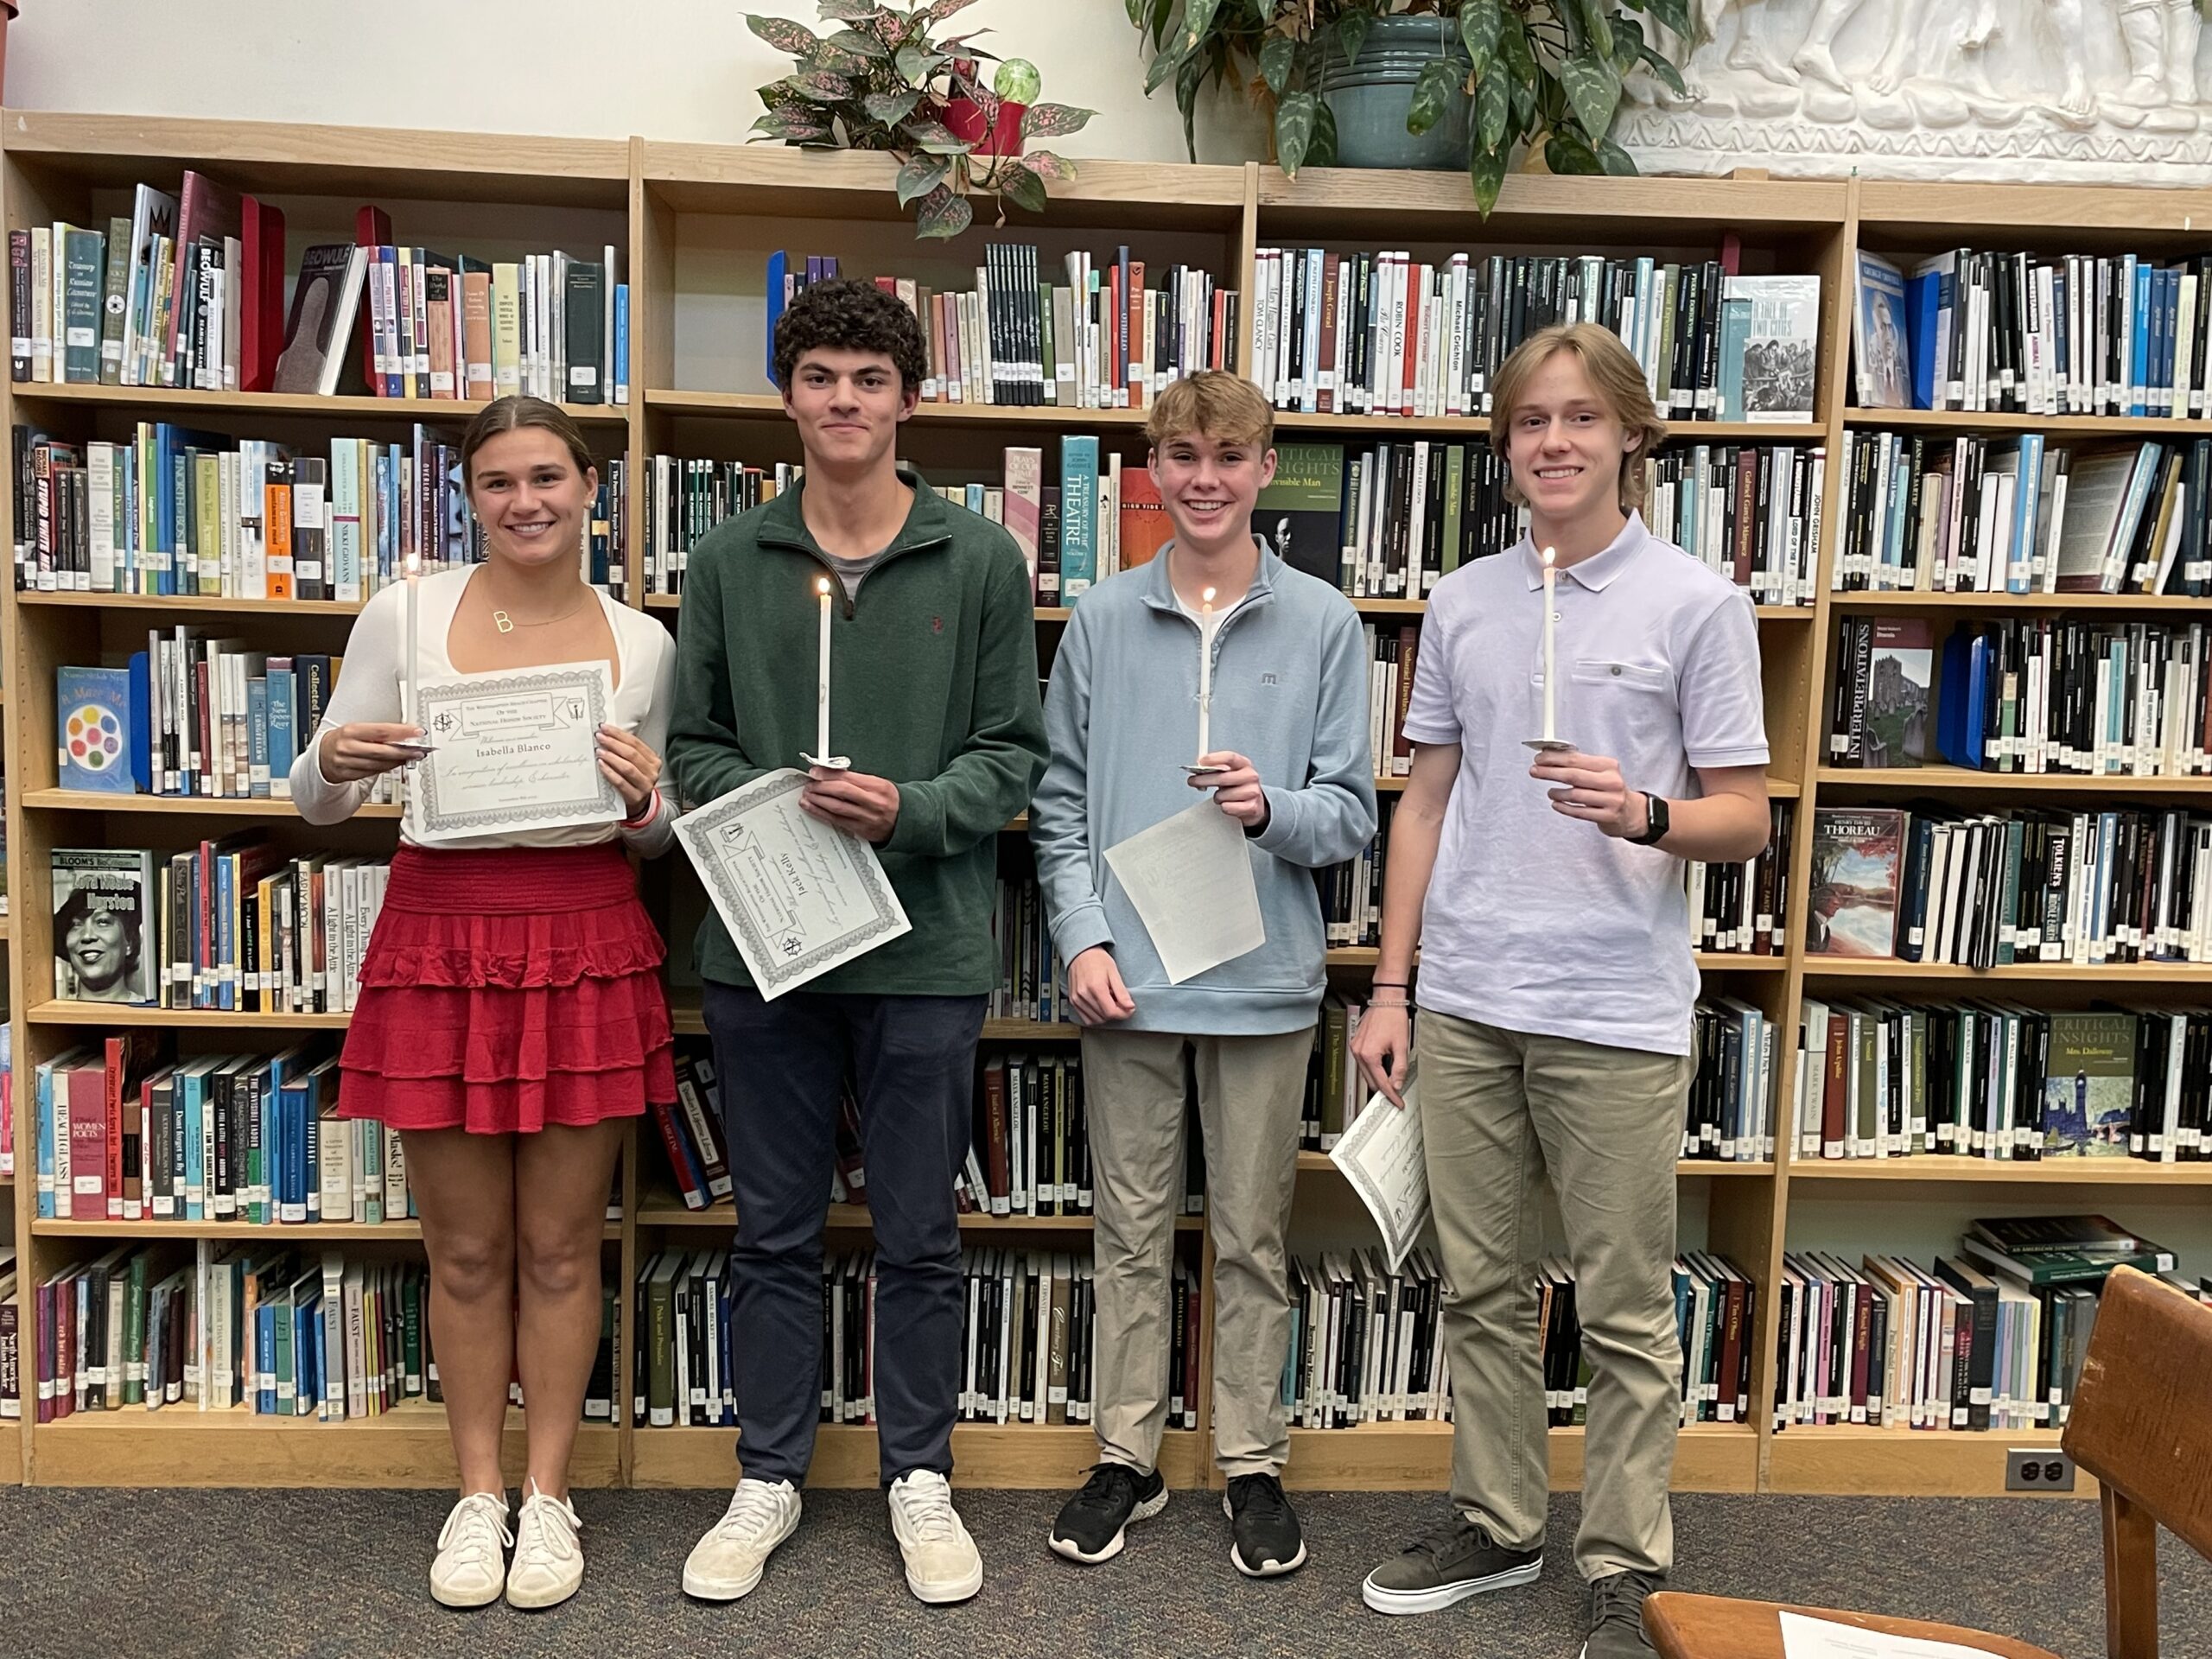 Four new members were inducted into the Westhampton Beach High School
National Honor Society during a ceremony on Nov. 8: from left, Isabella Blanco, Jack Kelly, Ashton Lundborg and Dylan Specht.. The new members were inducted in recognition of their  excellence in service, character, scholarship and leadership. COURTESY WESTHAMPTON BEACH SCHOOL DISTRICT